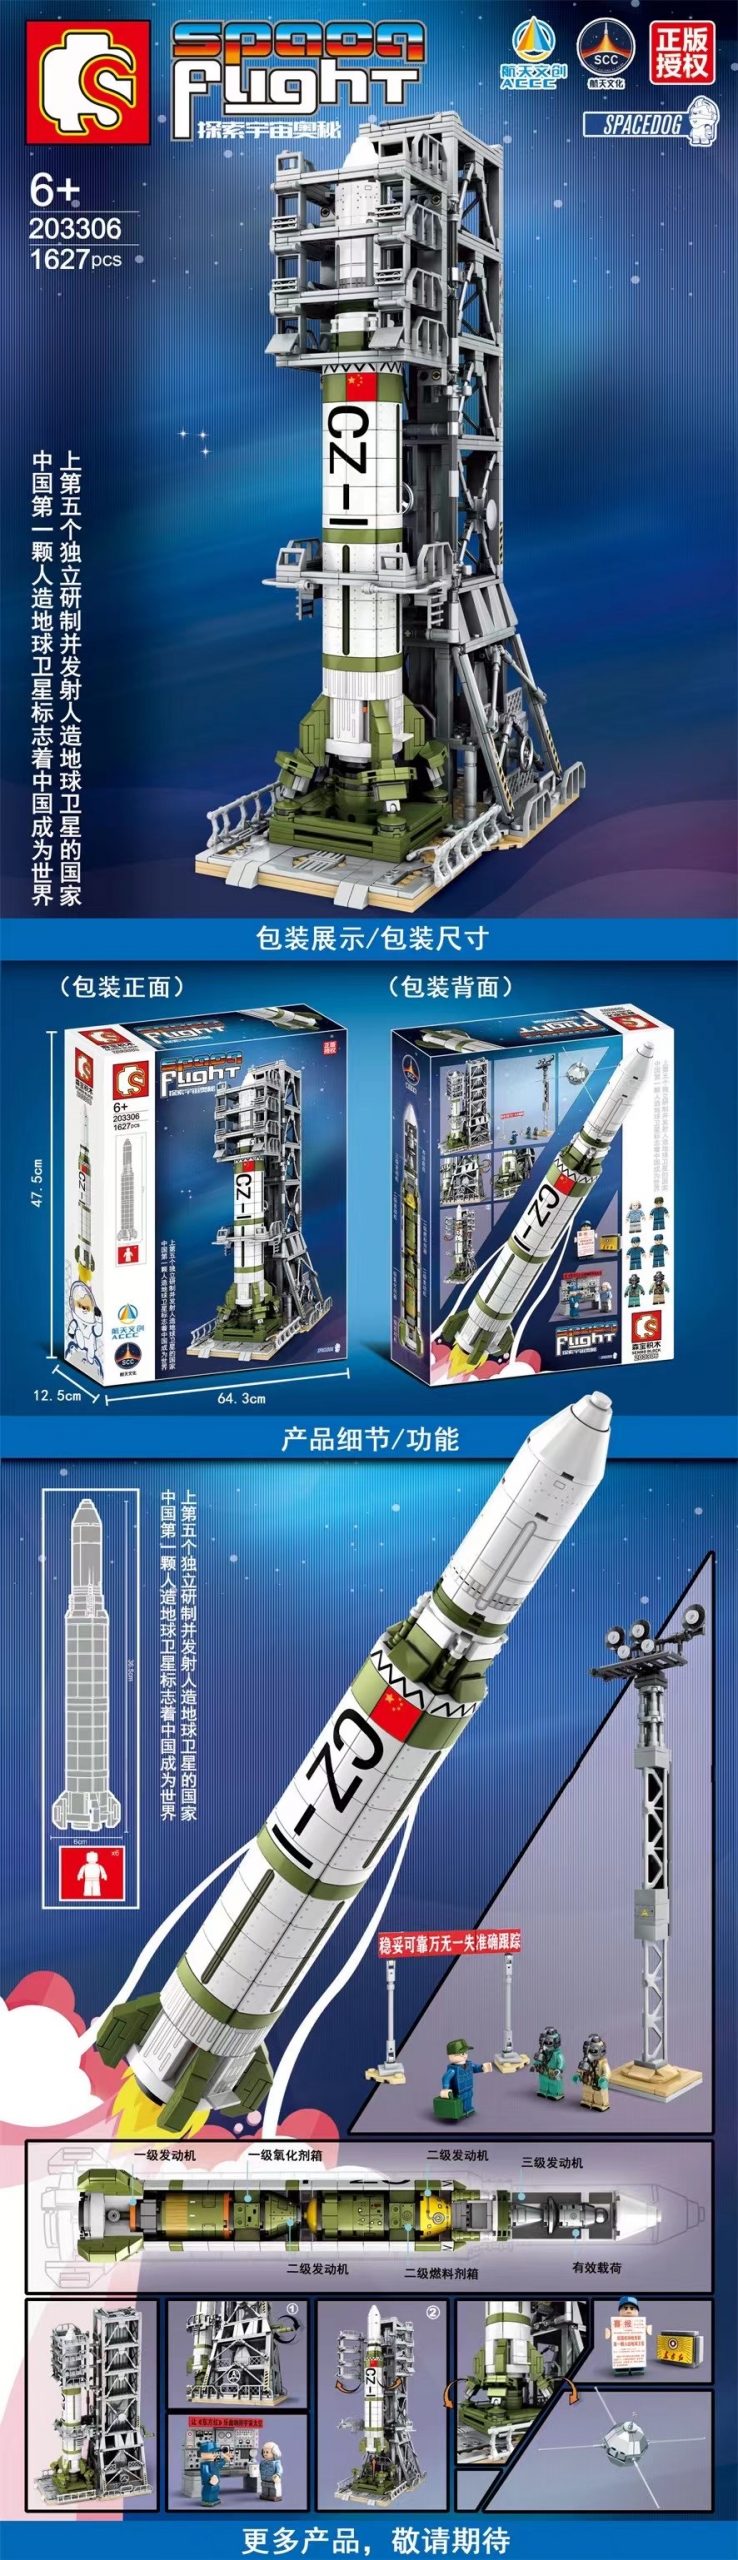 China Aerospace Culture Satellite Launch SPACE SEMBO 203306 with 1627 pieces